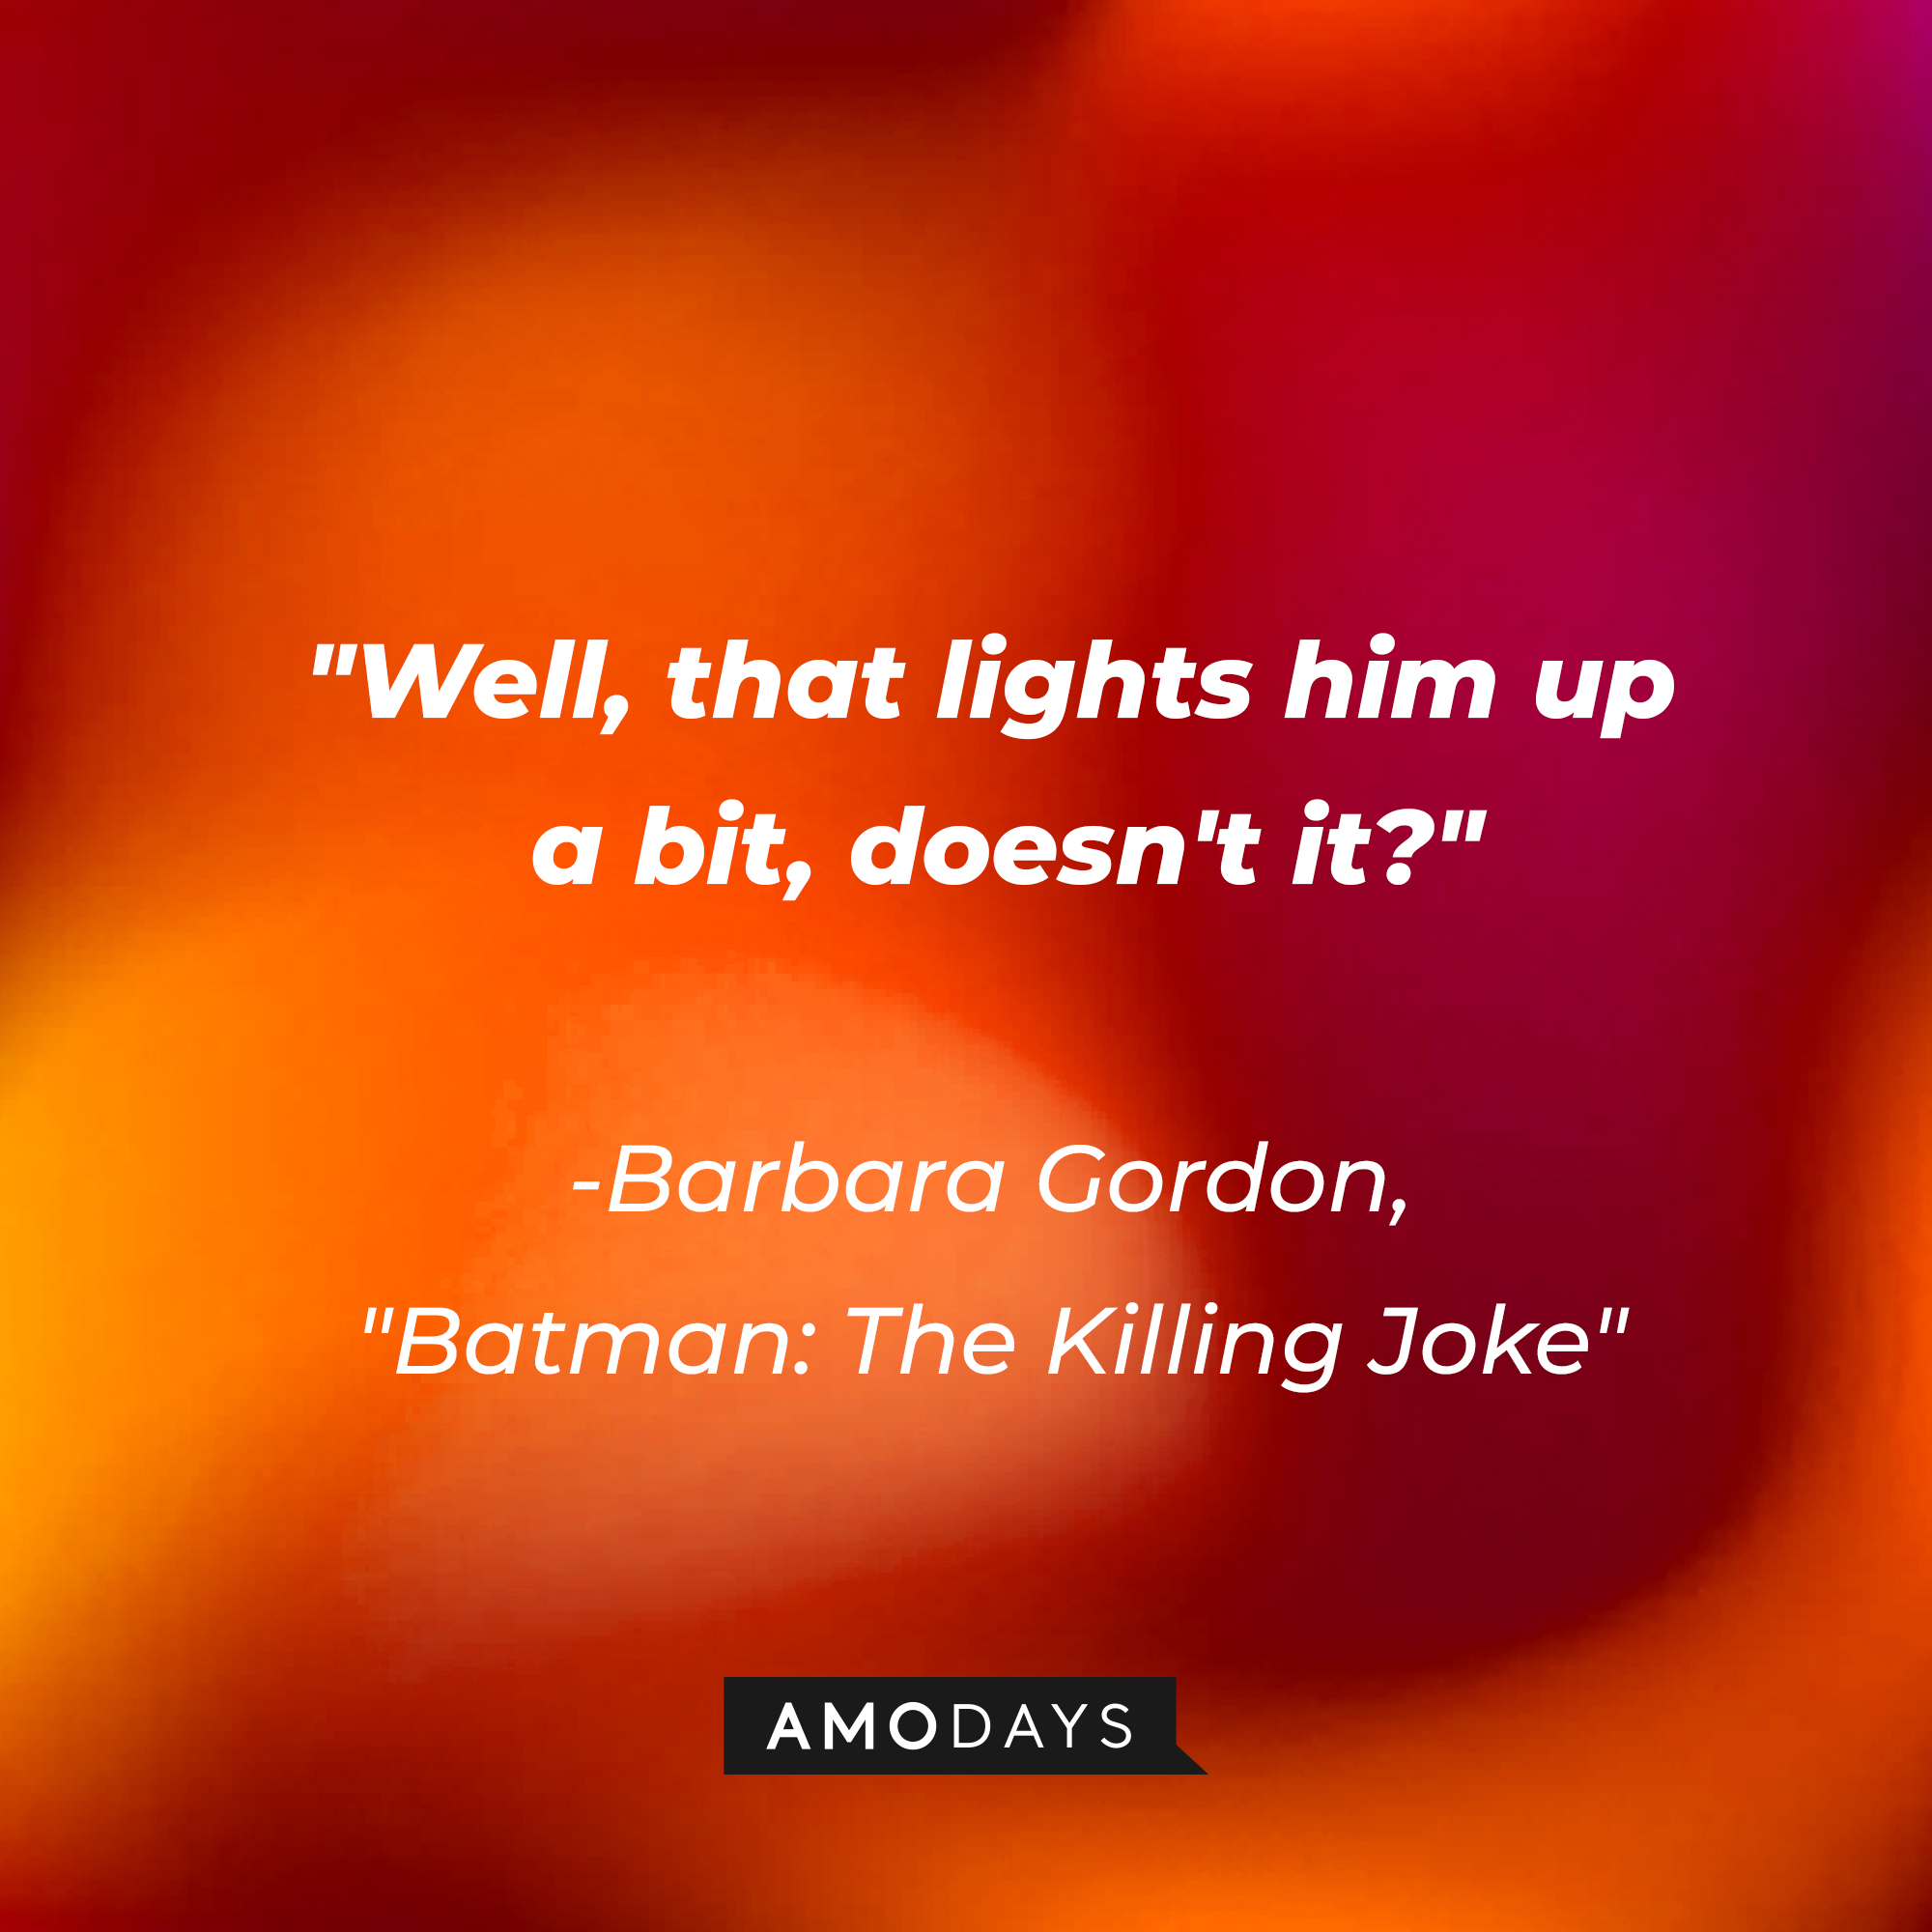 Barbara Gordon's quote from the "Batman: The Killing Joke" animated film: "Well, that lights him up a bit, doesn't it?" | Source: AmoDays